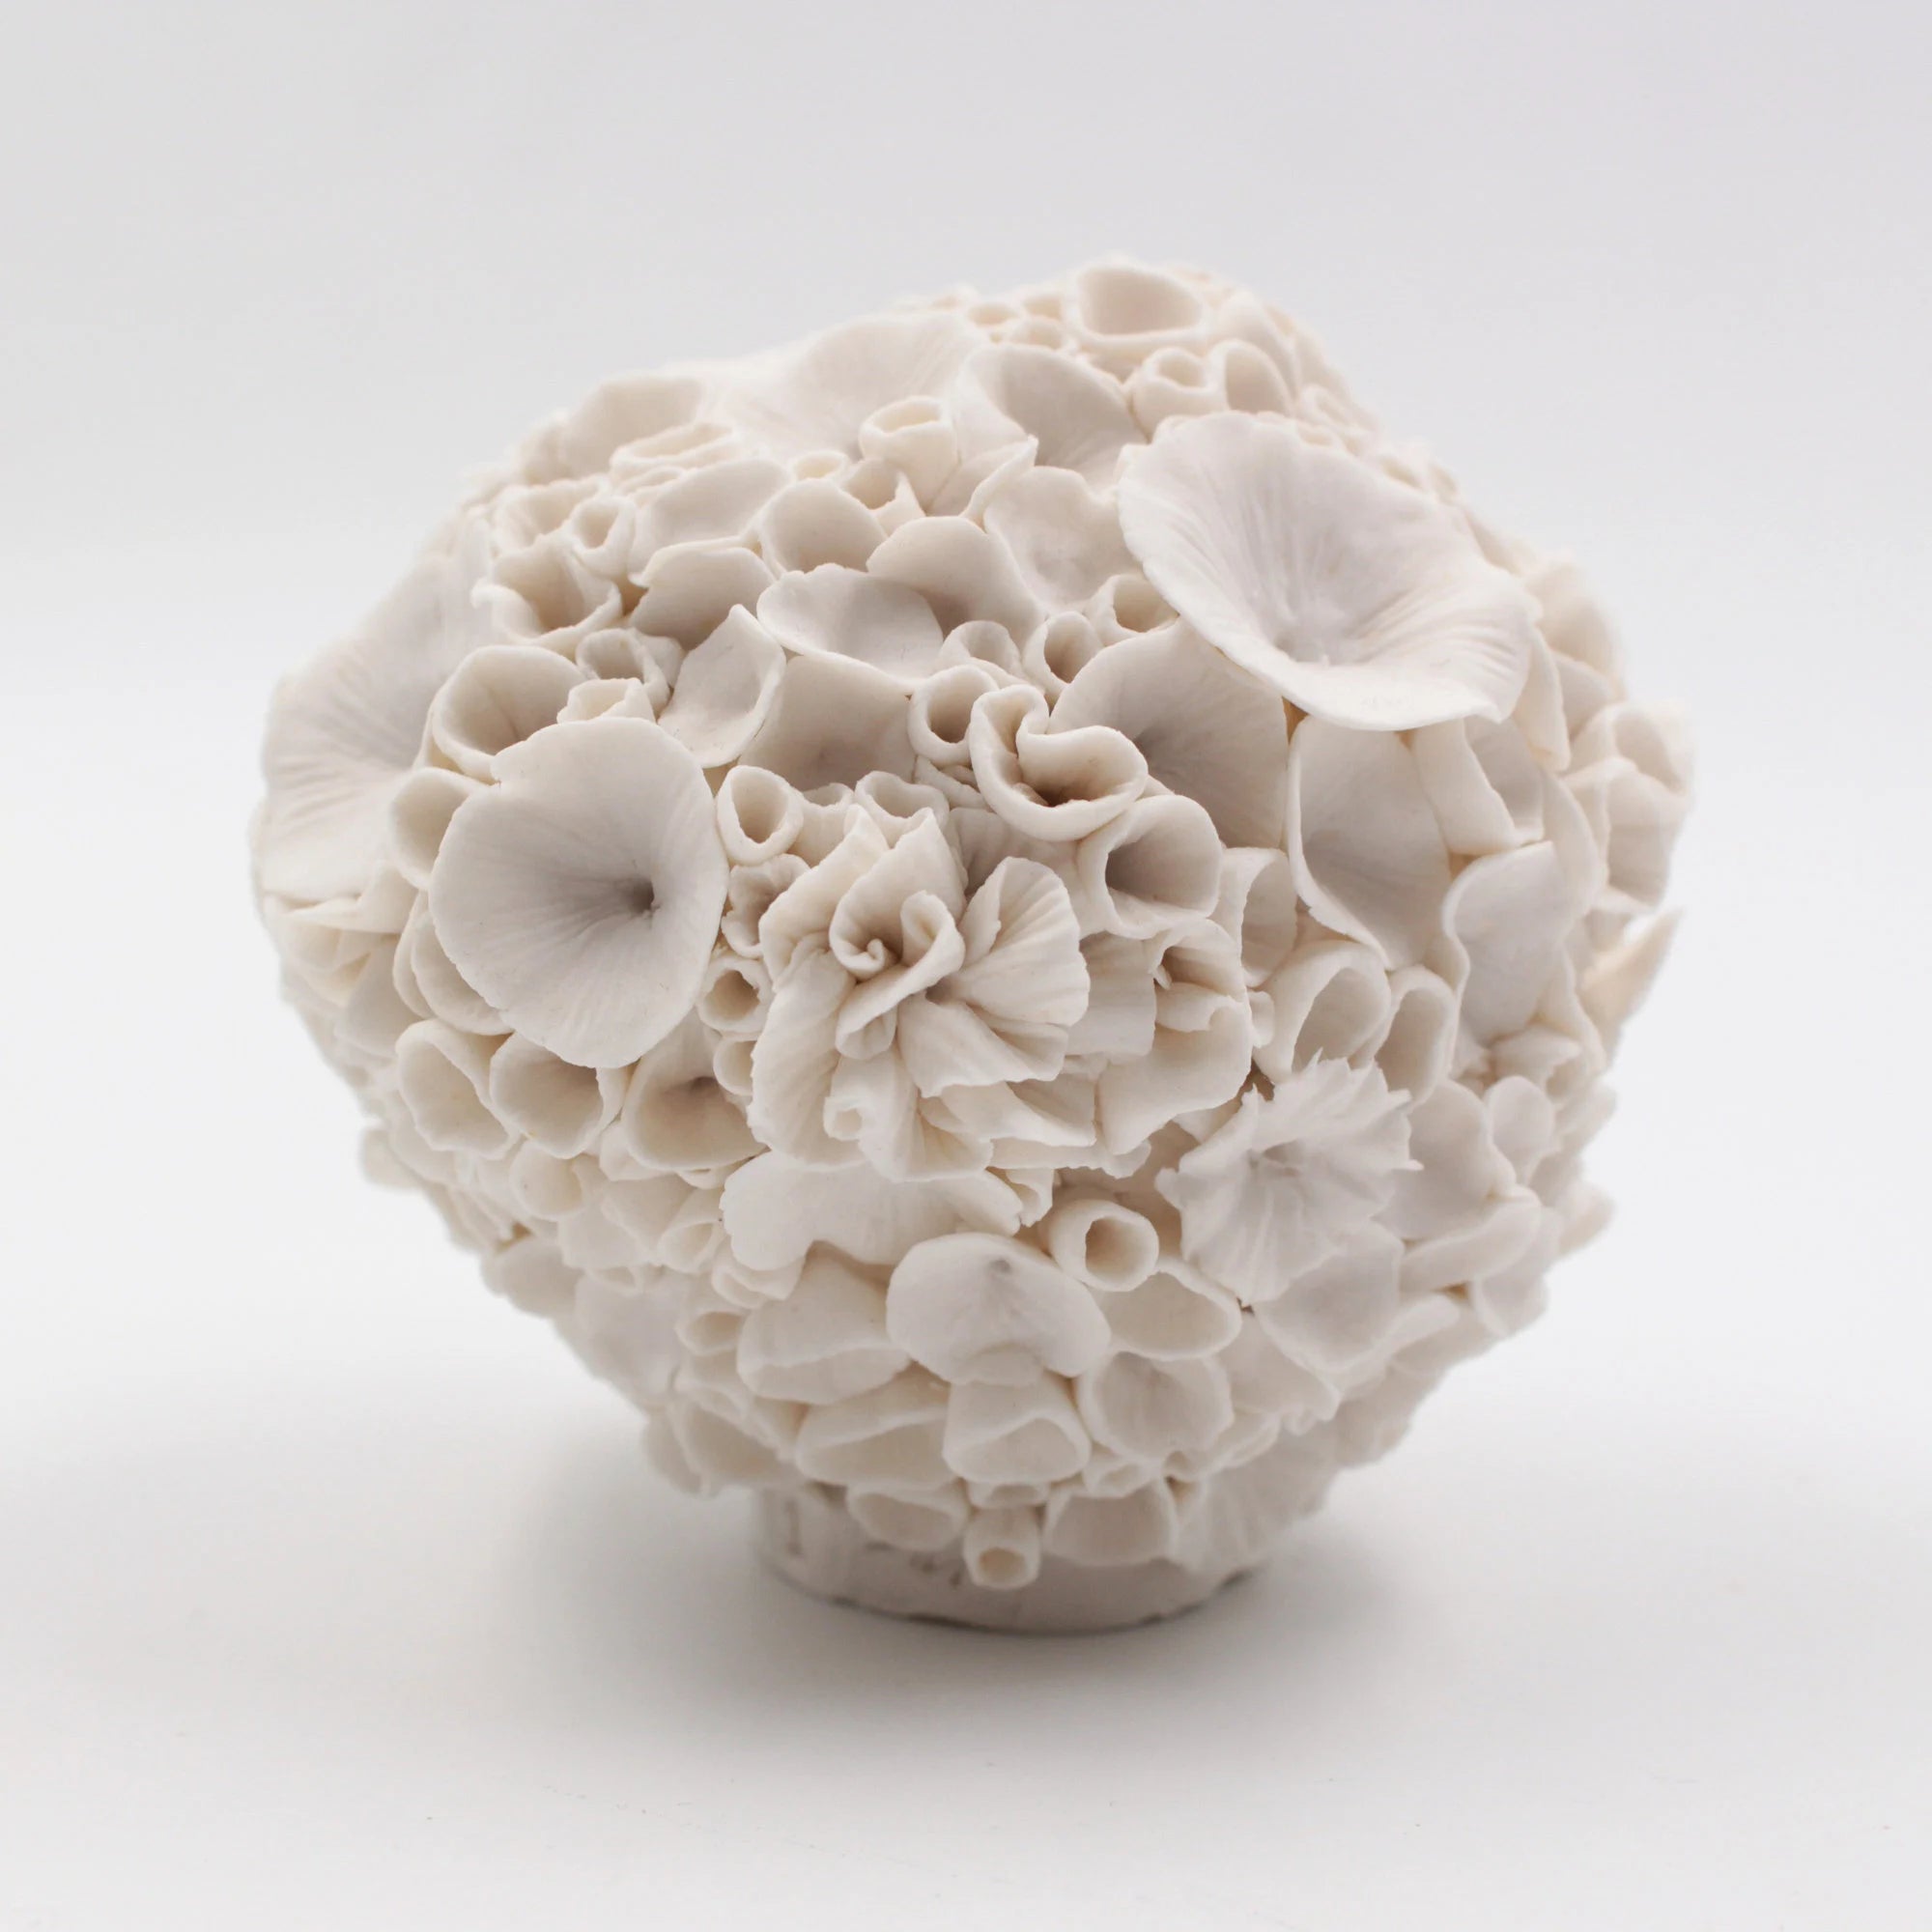 Coral Sculpture - Alain Granell